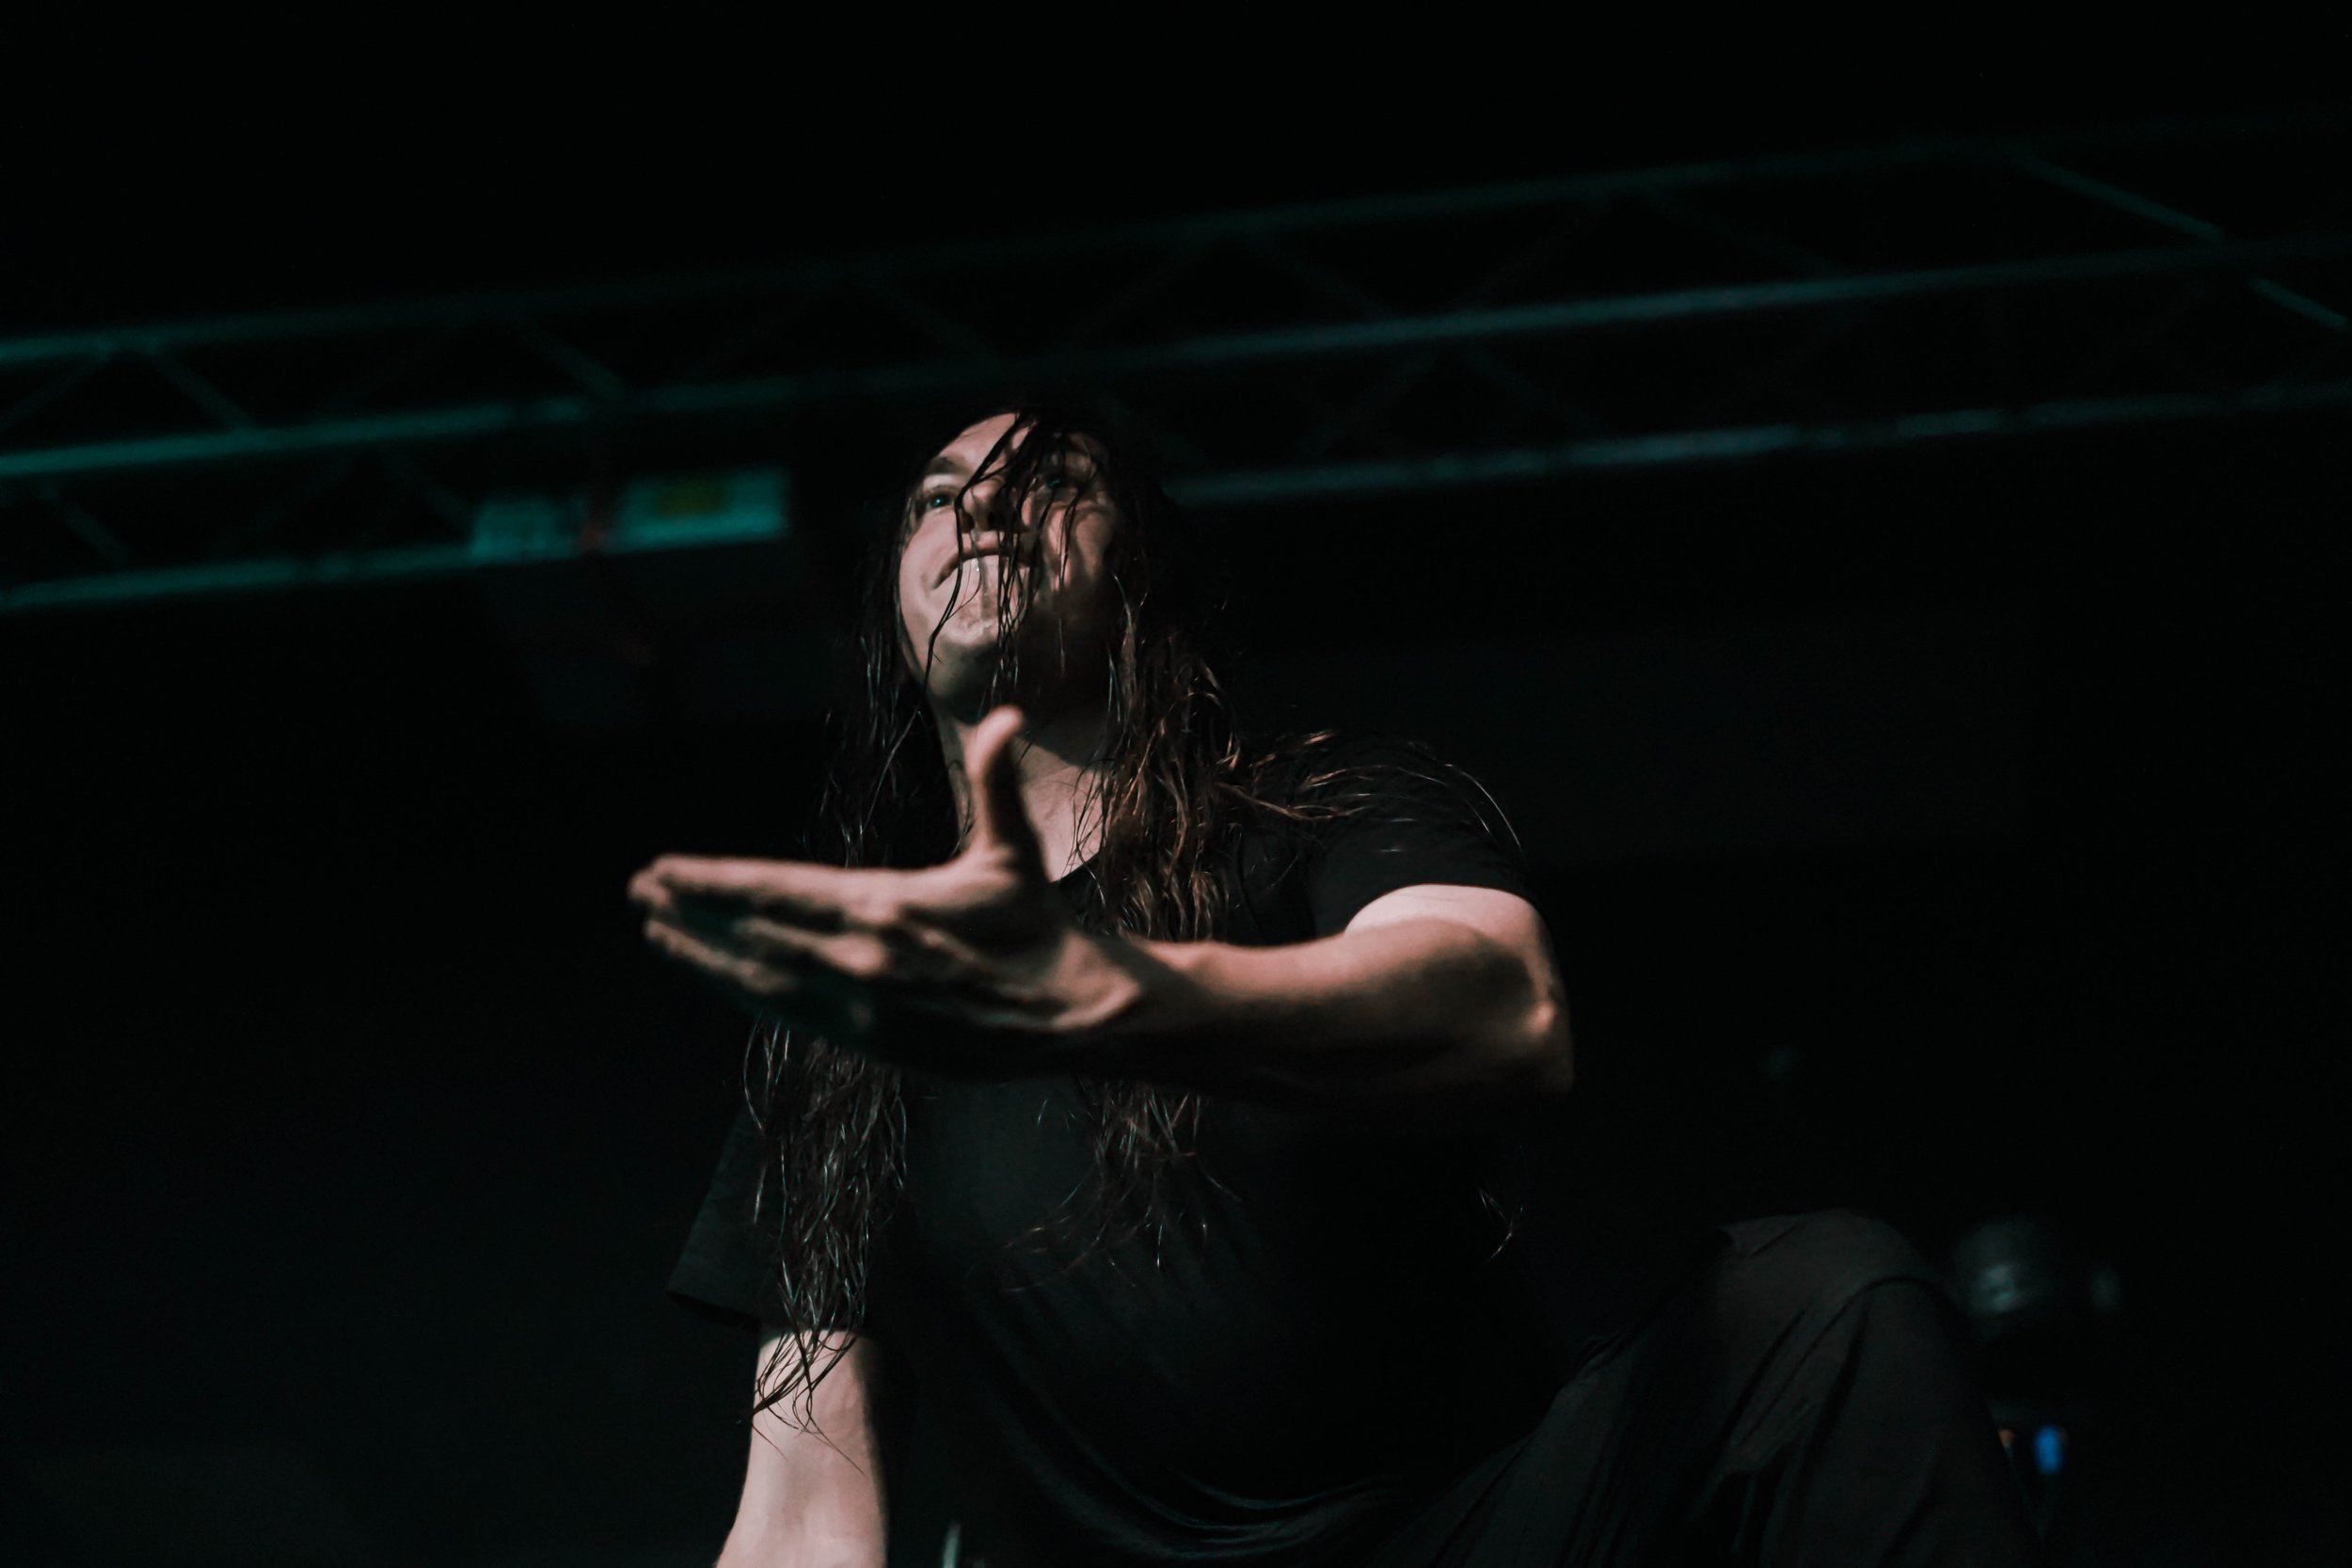 Shadow of Intent at The Concourse in Knoxville, TN